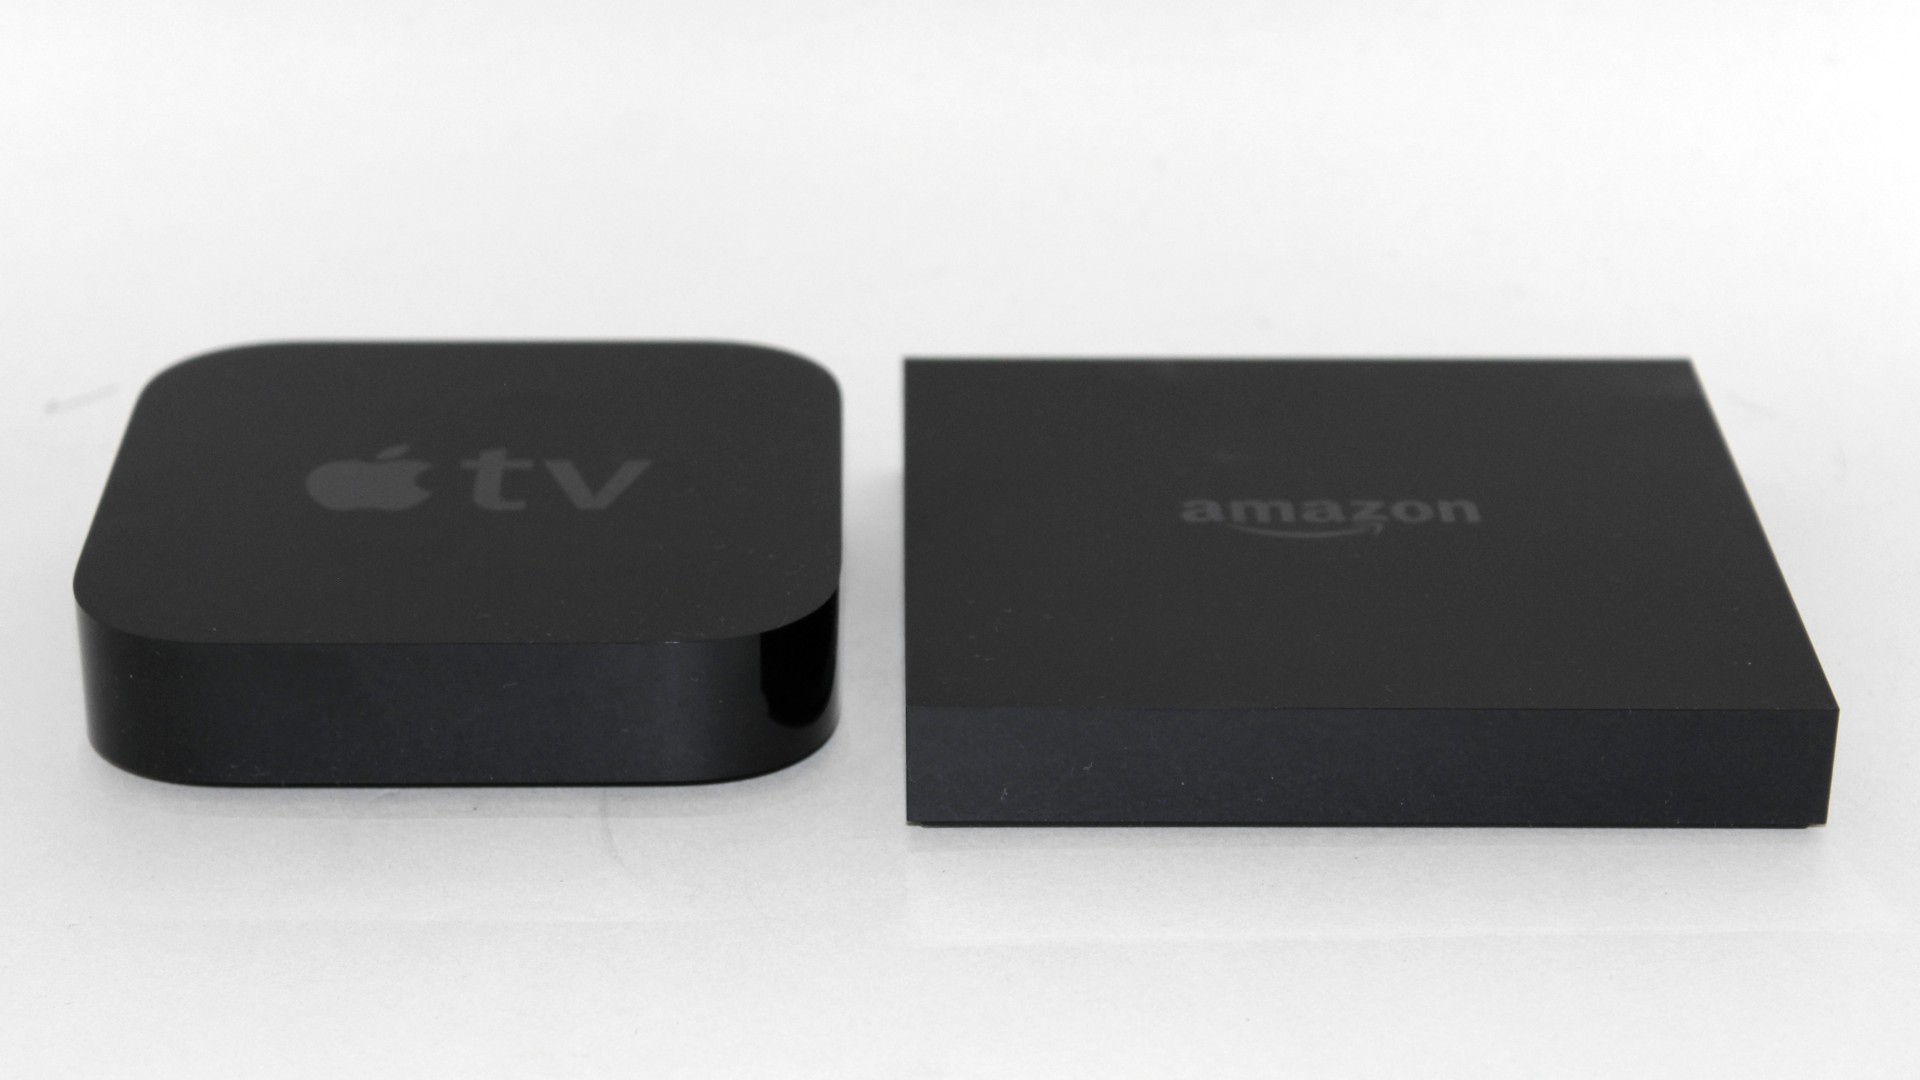 Amazon Fire TV and Apple TV side by side